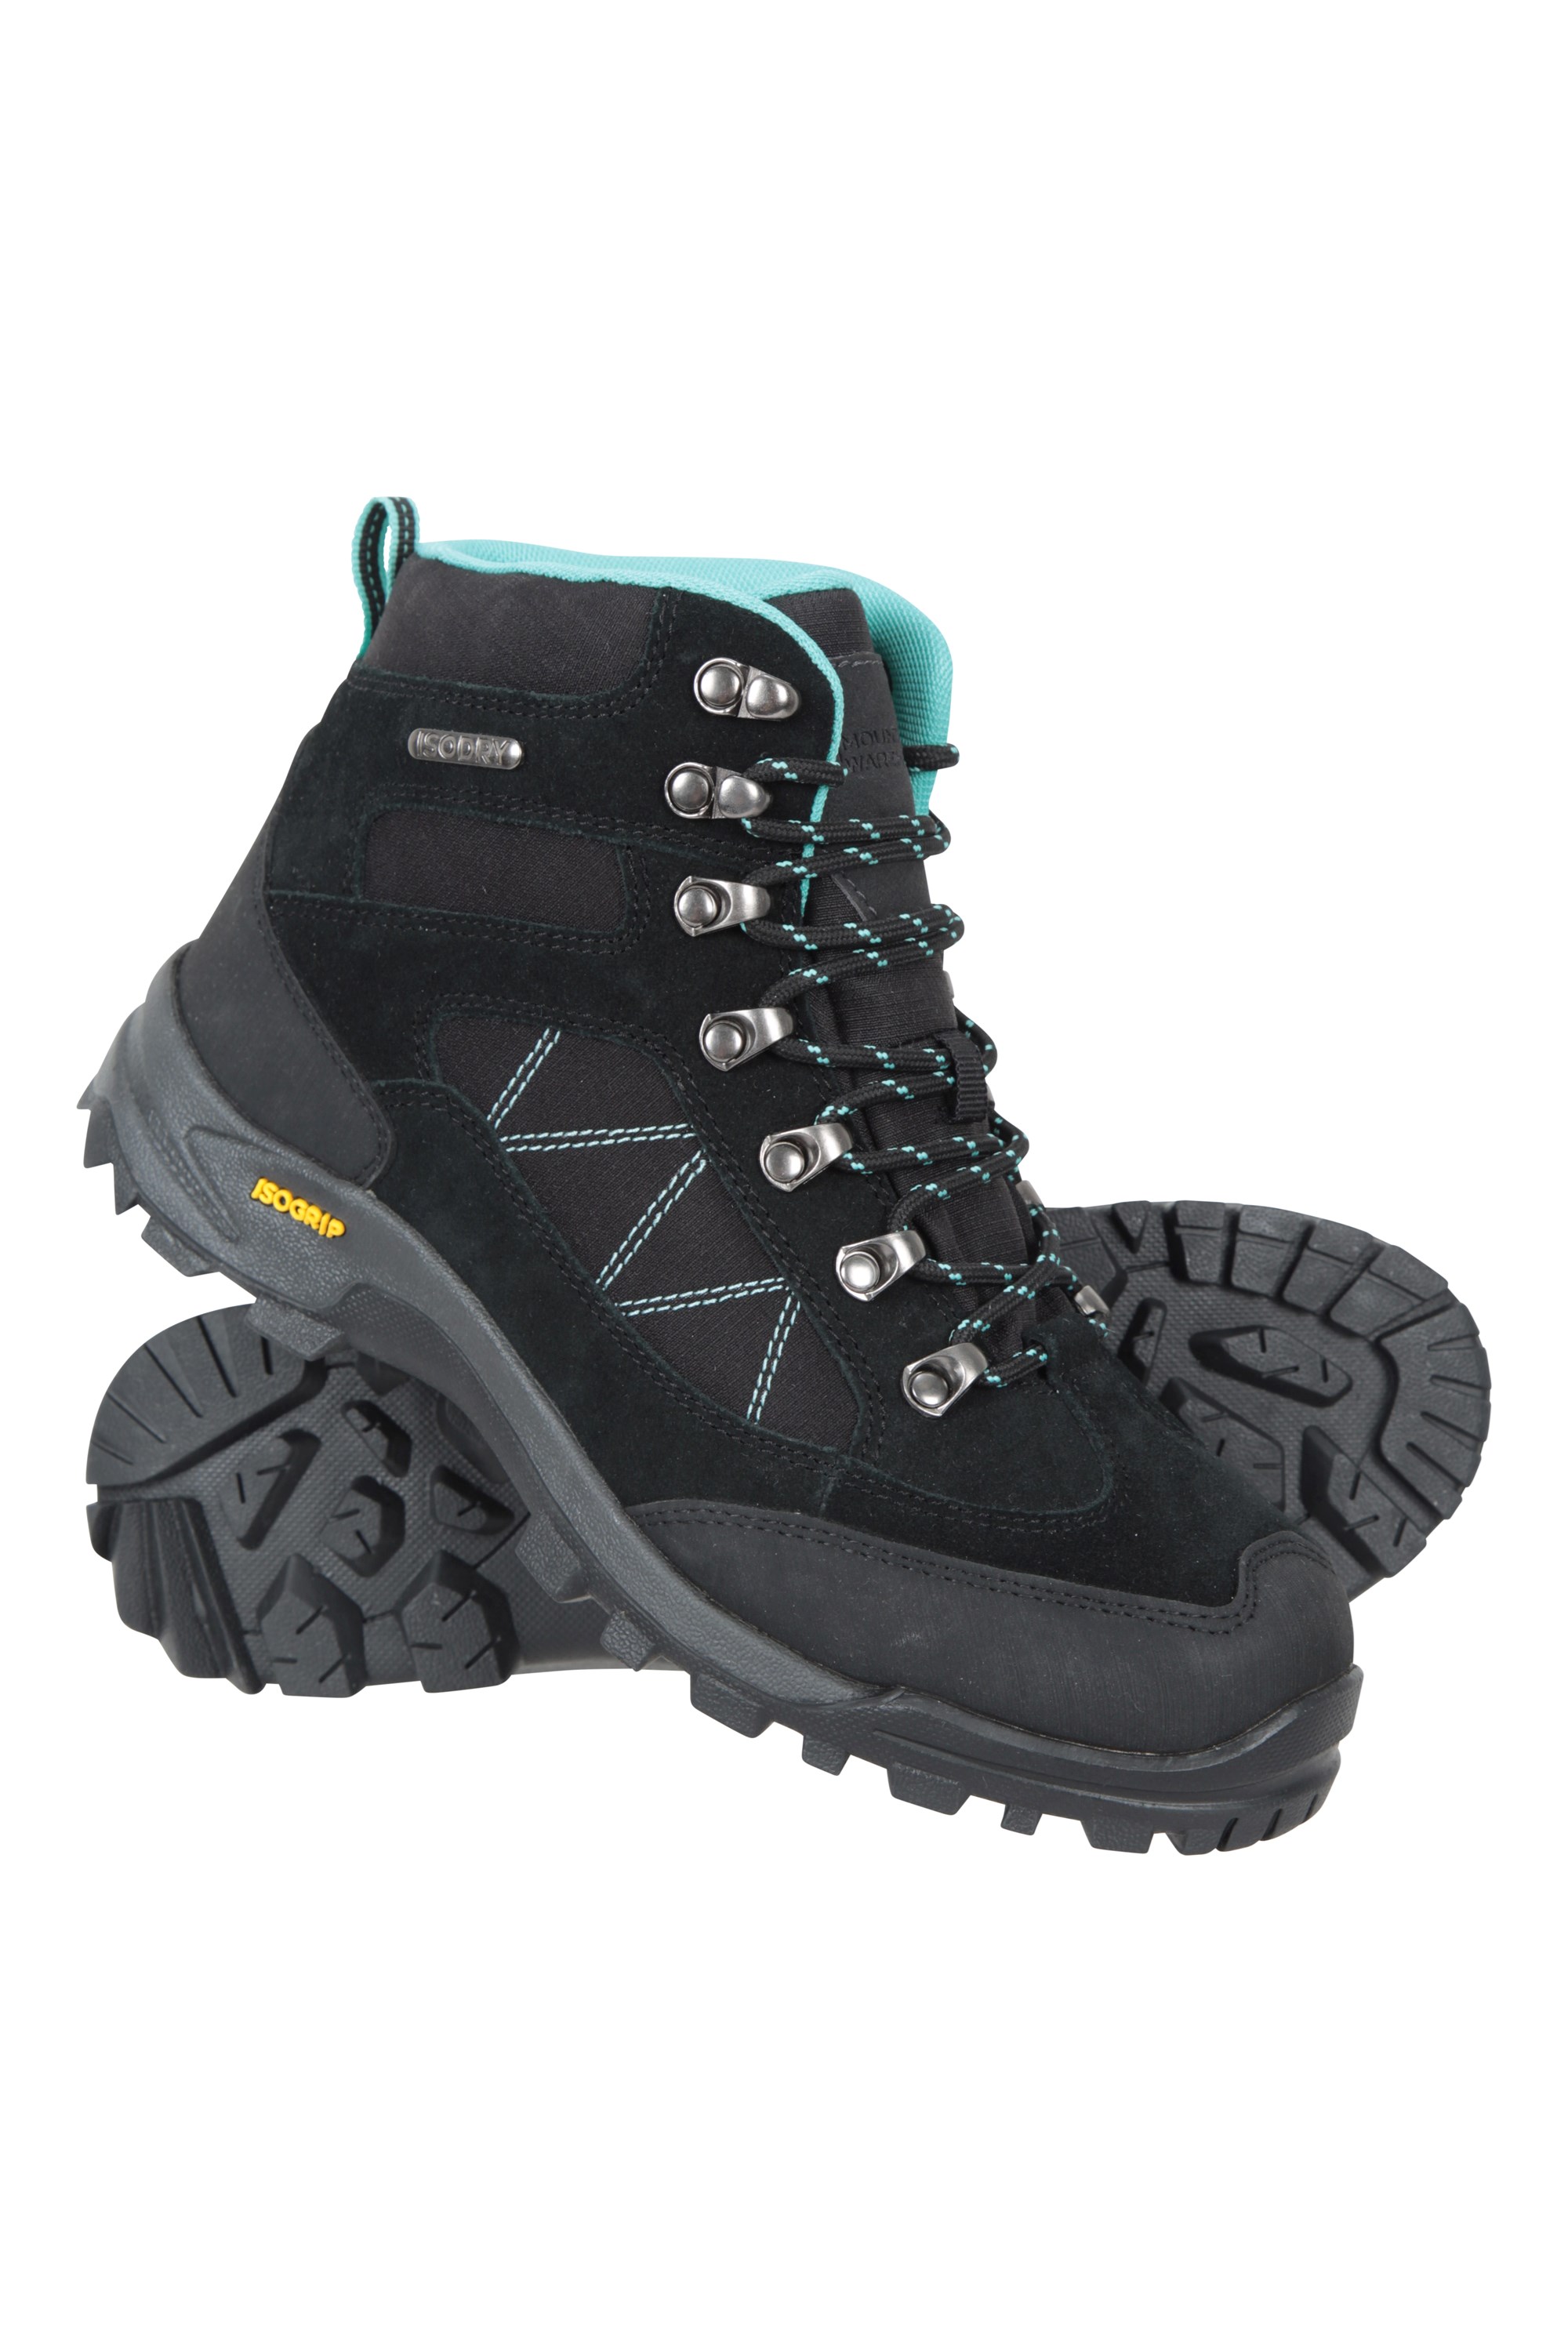 Extreme Storm Womens Waterproof IsoGrip Boots - Black